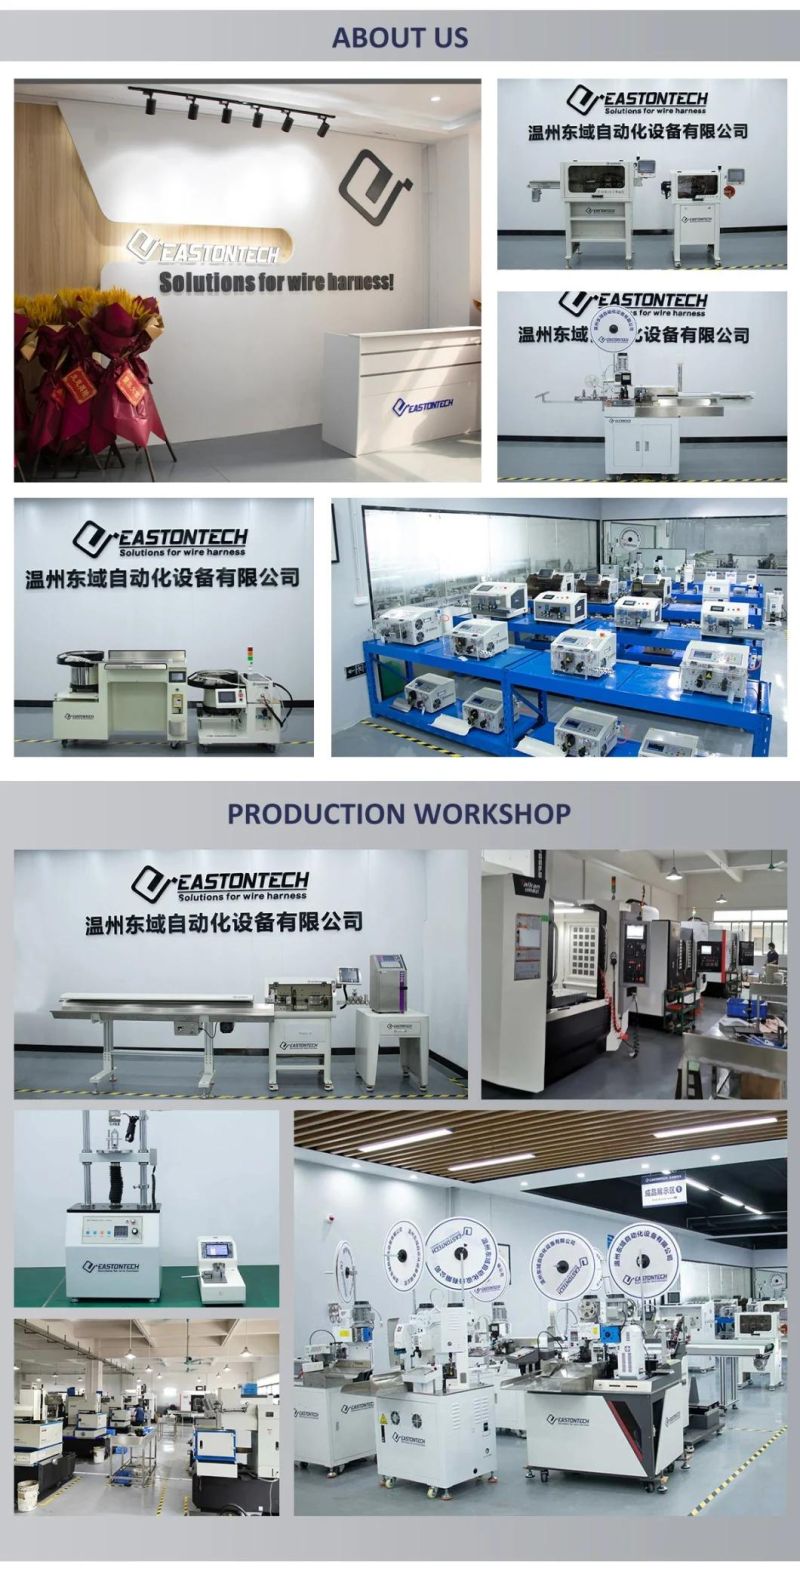 Eastontech Two Wires Combined Crimping Machine Fully Automatic Three Ends Terminal Crimping Machine for AWG34-AWG14